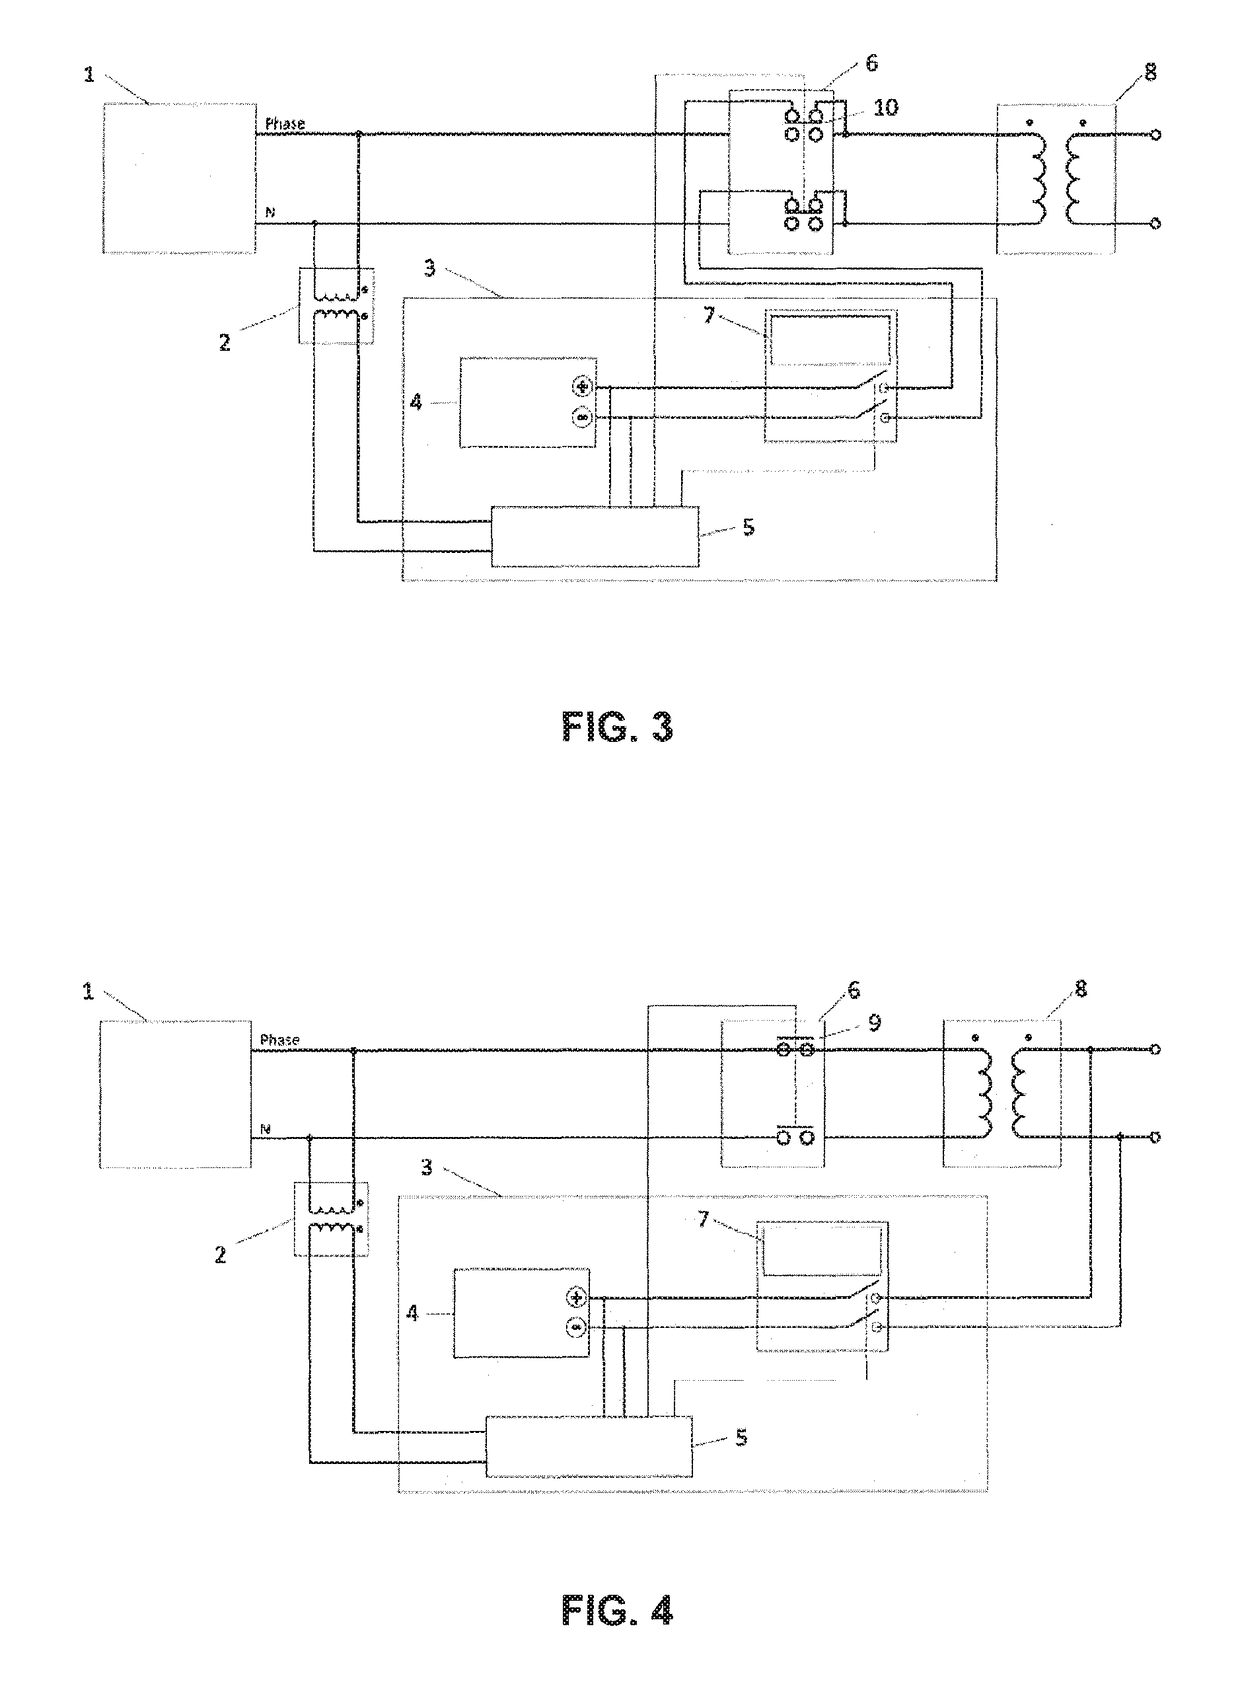 Method for reducing the inrush current of an inductive load